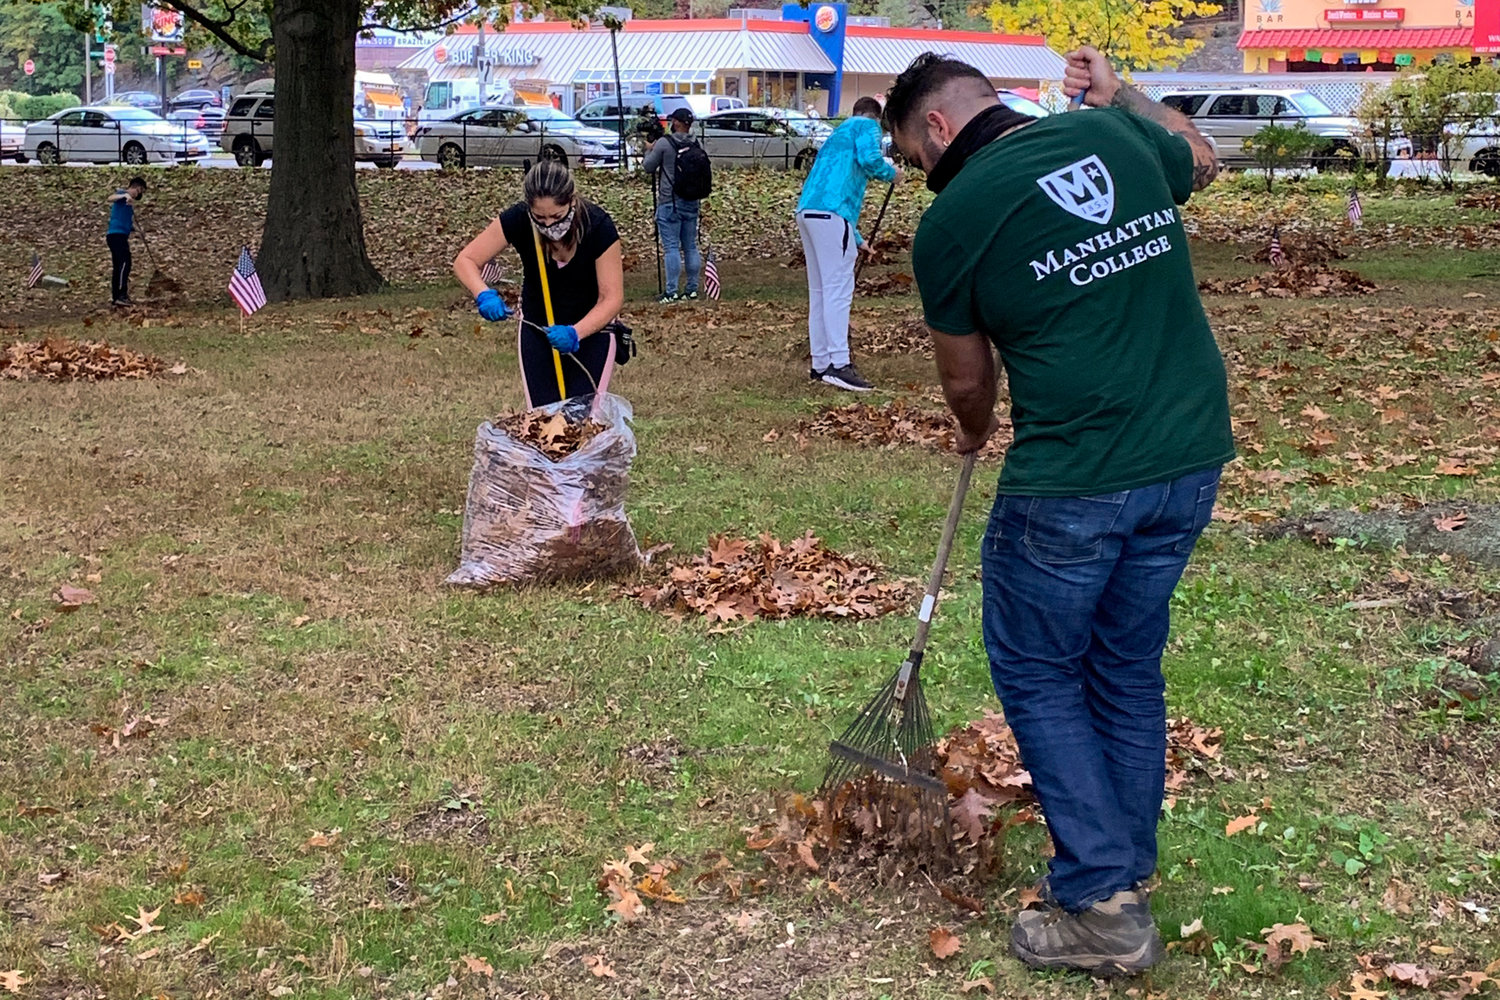 Members of Manhattan College’s Student Veteran Organization say some of their favorite volunteer experiences included doing clean-ups of Dogwood Junction near the school’s campus, as well as at Memorial Grove in Van Cortlandt Park last year. It was those efforts and more that earned them the top service award from Community Board 8, named after longtime neighborhood advocate Irving Ladimer.